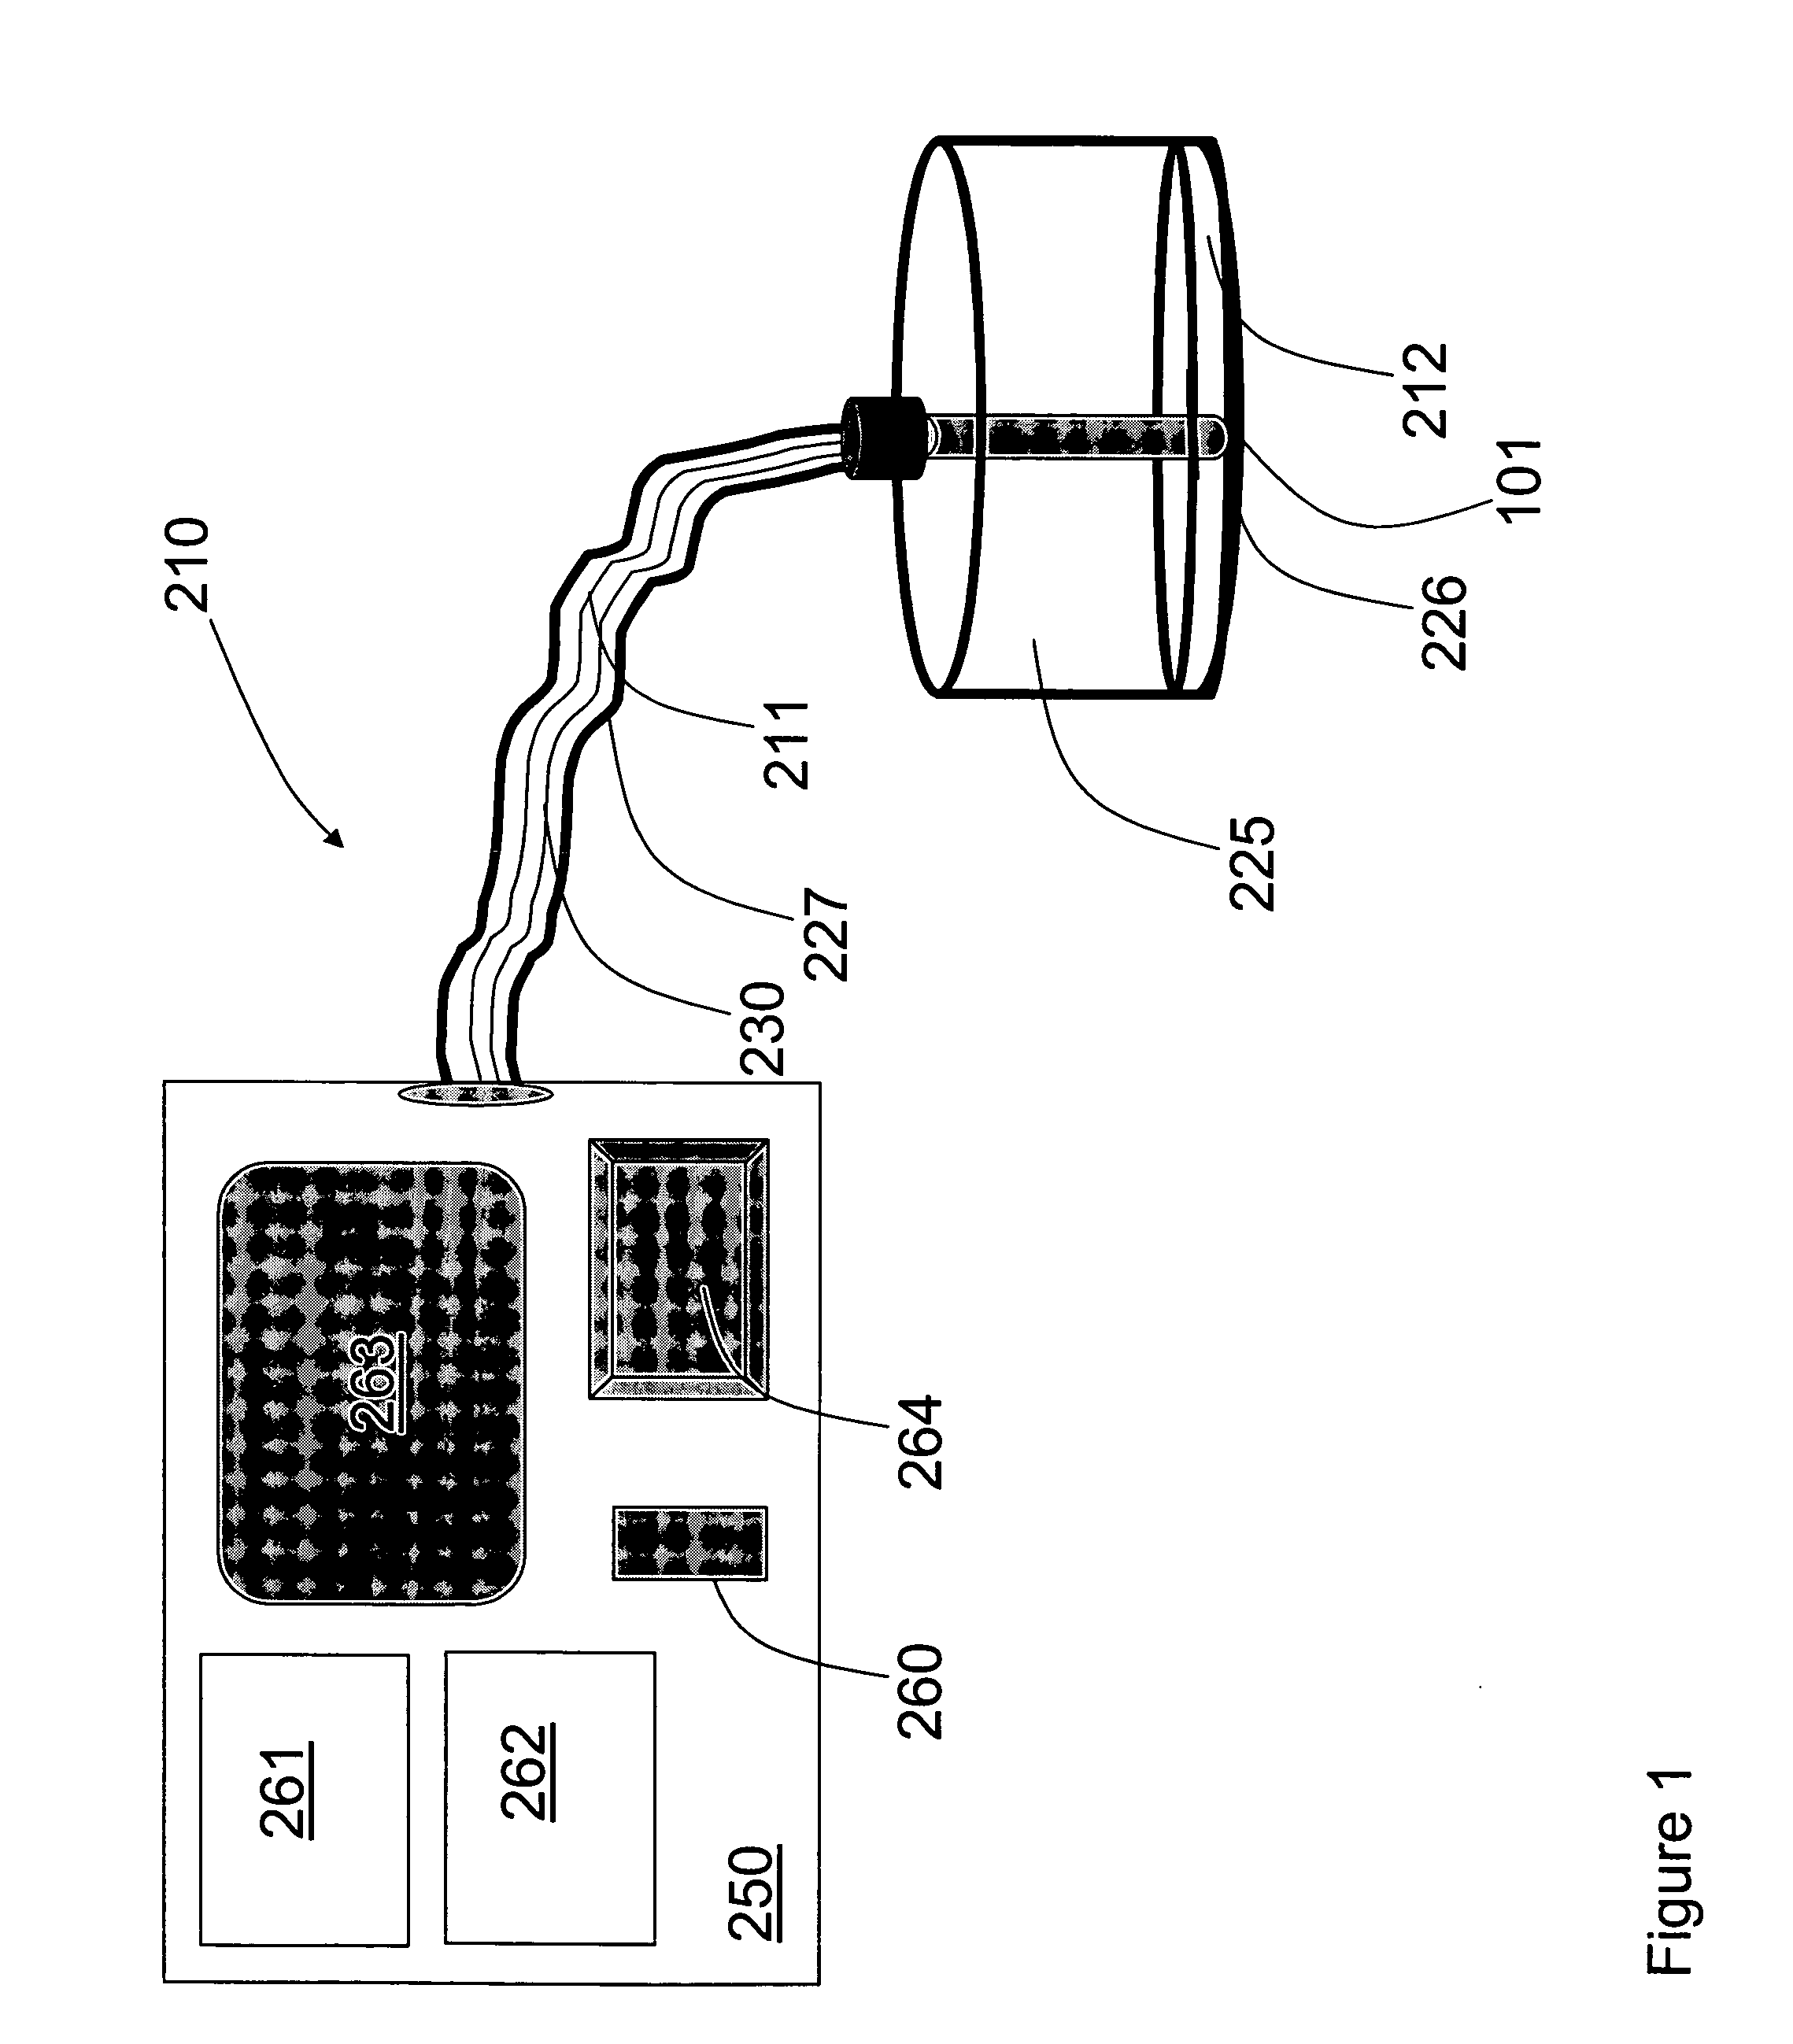 Photoacoustic analyzer of region of interest in a human body